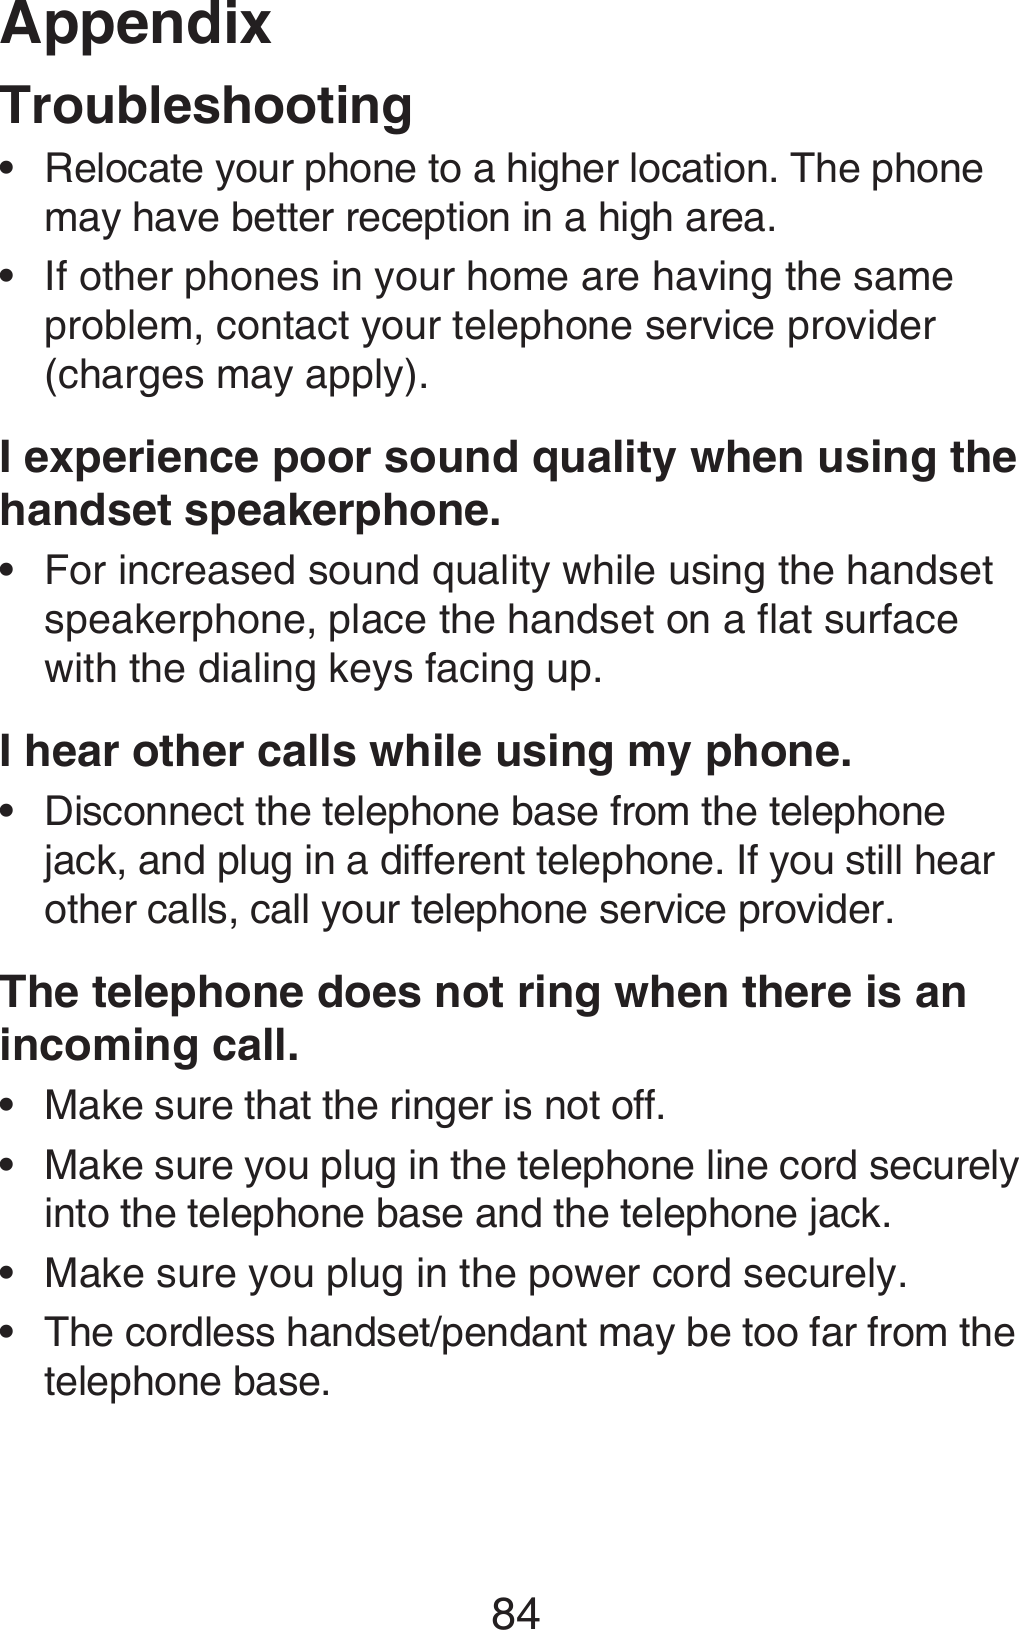 Appendix84TroubleshootingRelocate your phone to a higher location. The phone may have better reception in a high area.If other phones in your home are having the same problem, contact your telephone service provider (charges may apply).I experience poor sound quality when using the handset speakerphone.For increased sound quality while using the handset speakerphone, place the handset on a flat surface with the dialing keys facing up.I hear other calls while using my phone.Disconnect the telephone base from the telephone jack, and plug in a different telephone. If you still hear other calls, call your telephone service provider.The telephone does not ring when there is an incoming call. Make sure that the ringer is not off. Make sure you plug in the telephone line cord securely into the telephone base and the telephone jack.Make sure you plug in the power cord securely.The cordless handset/pendant may be too far from the telephone base.••••••••